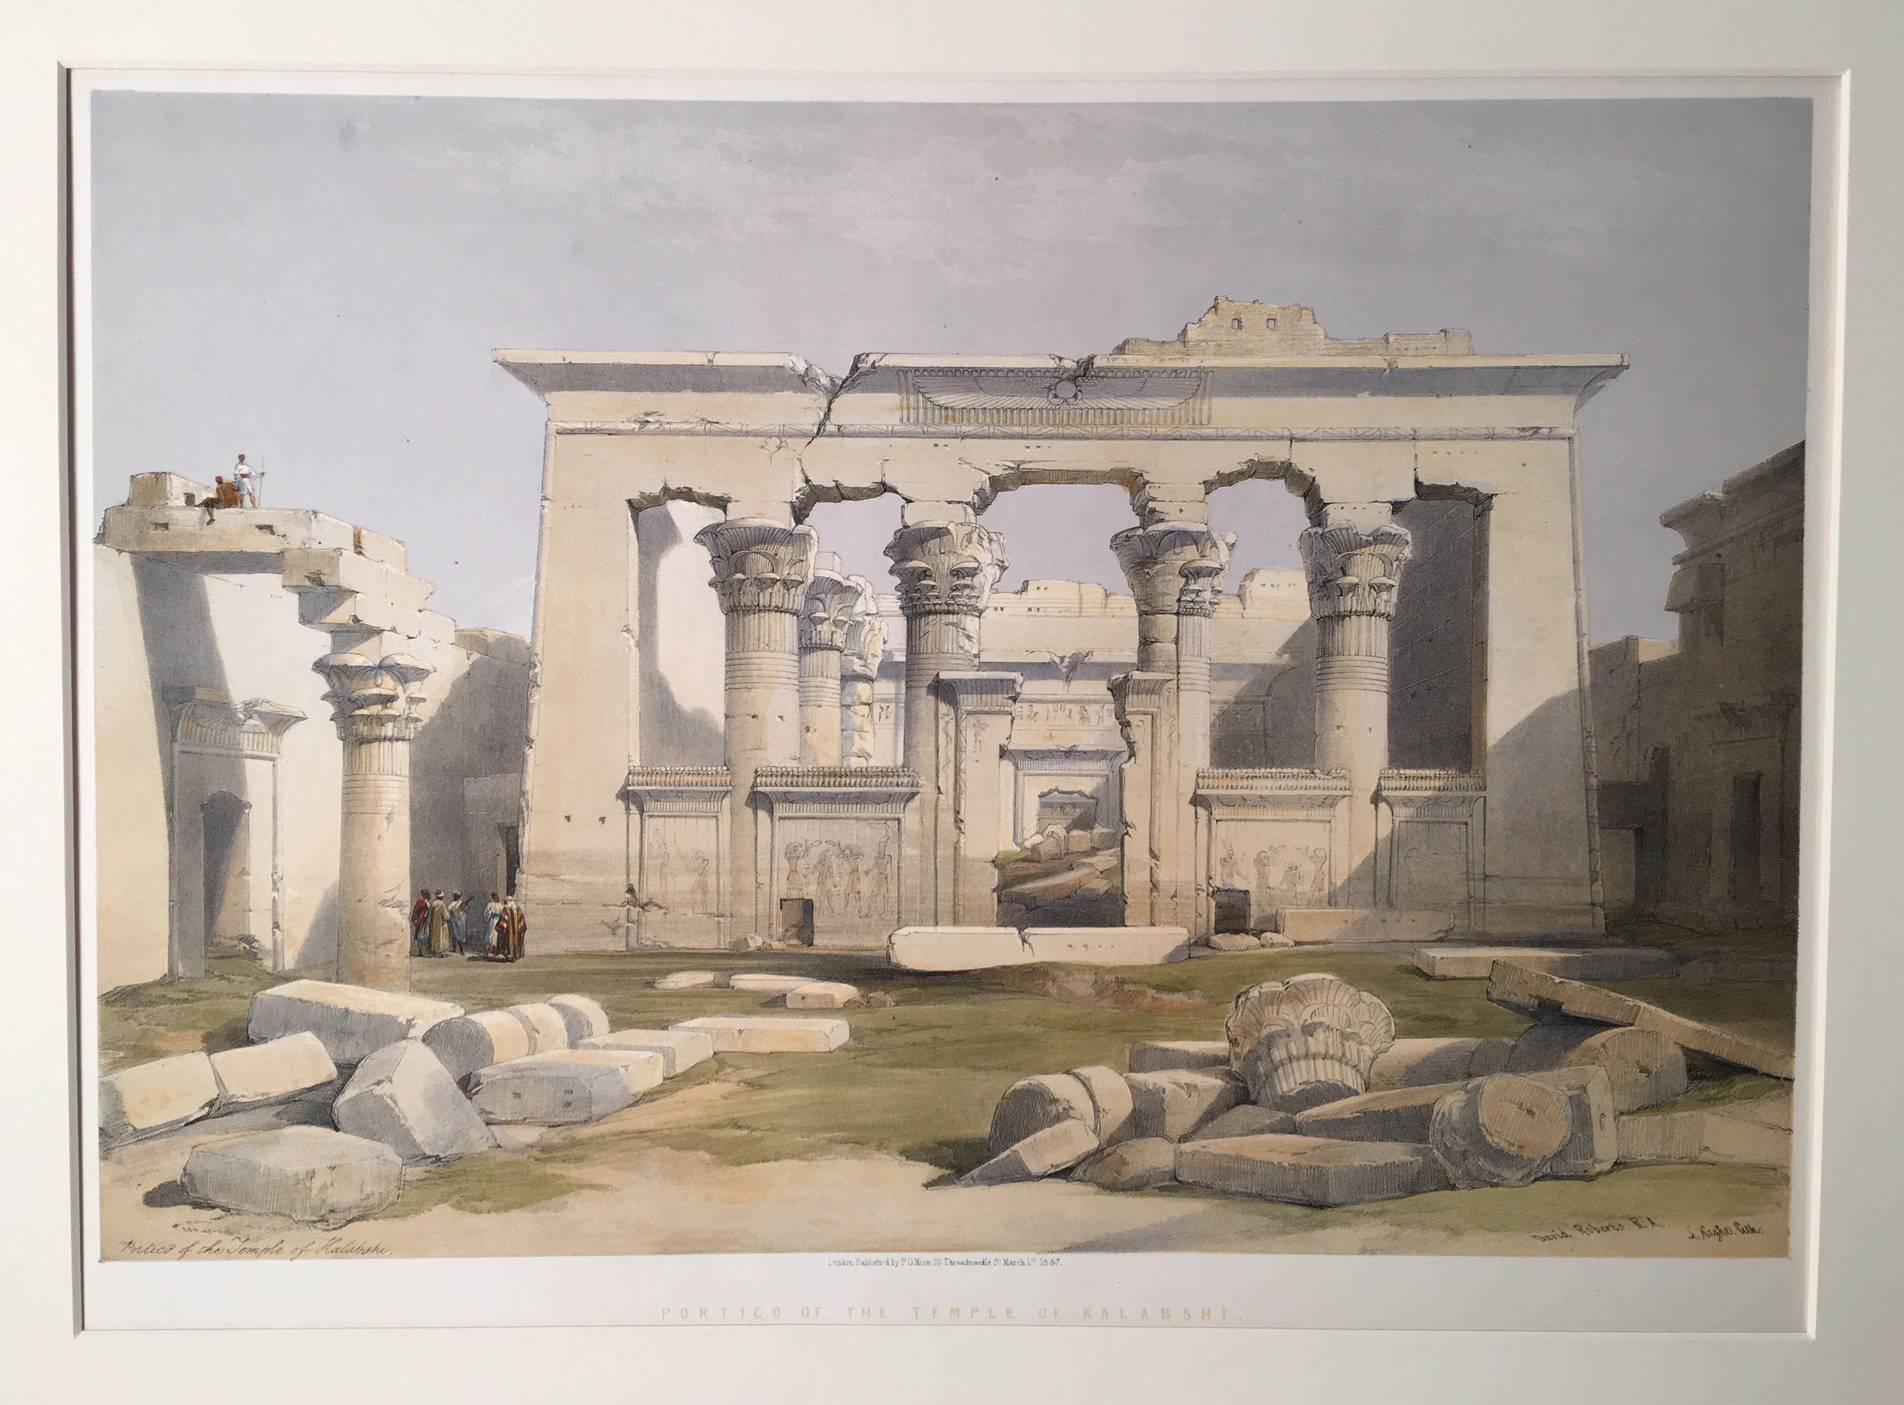 Portico of the Temple of Kalabsha - Print by David Roberts